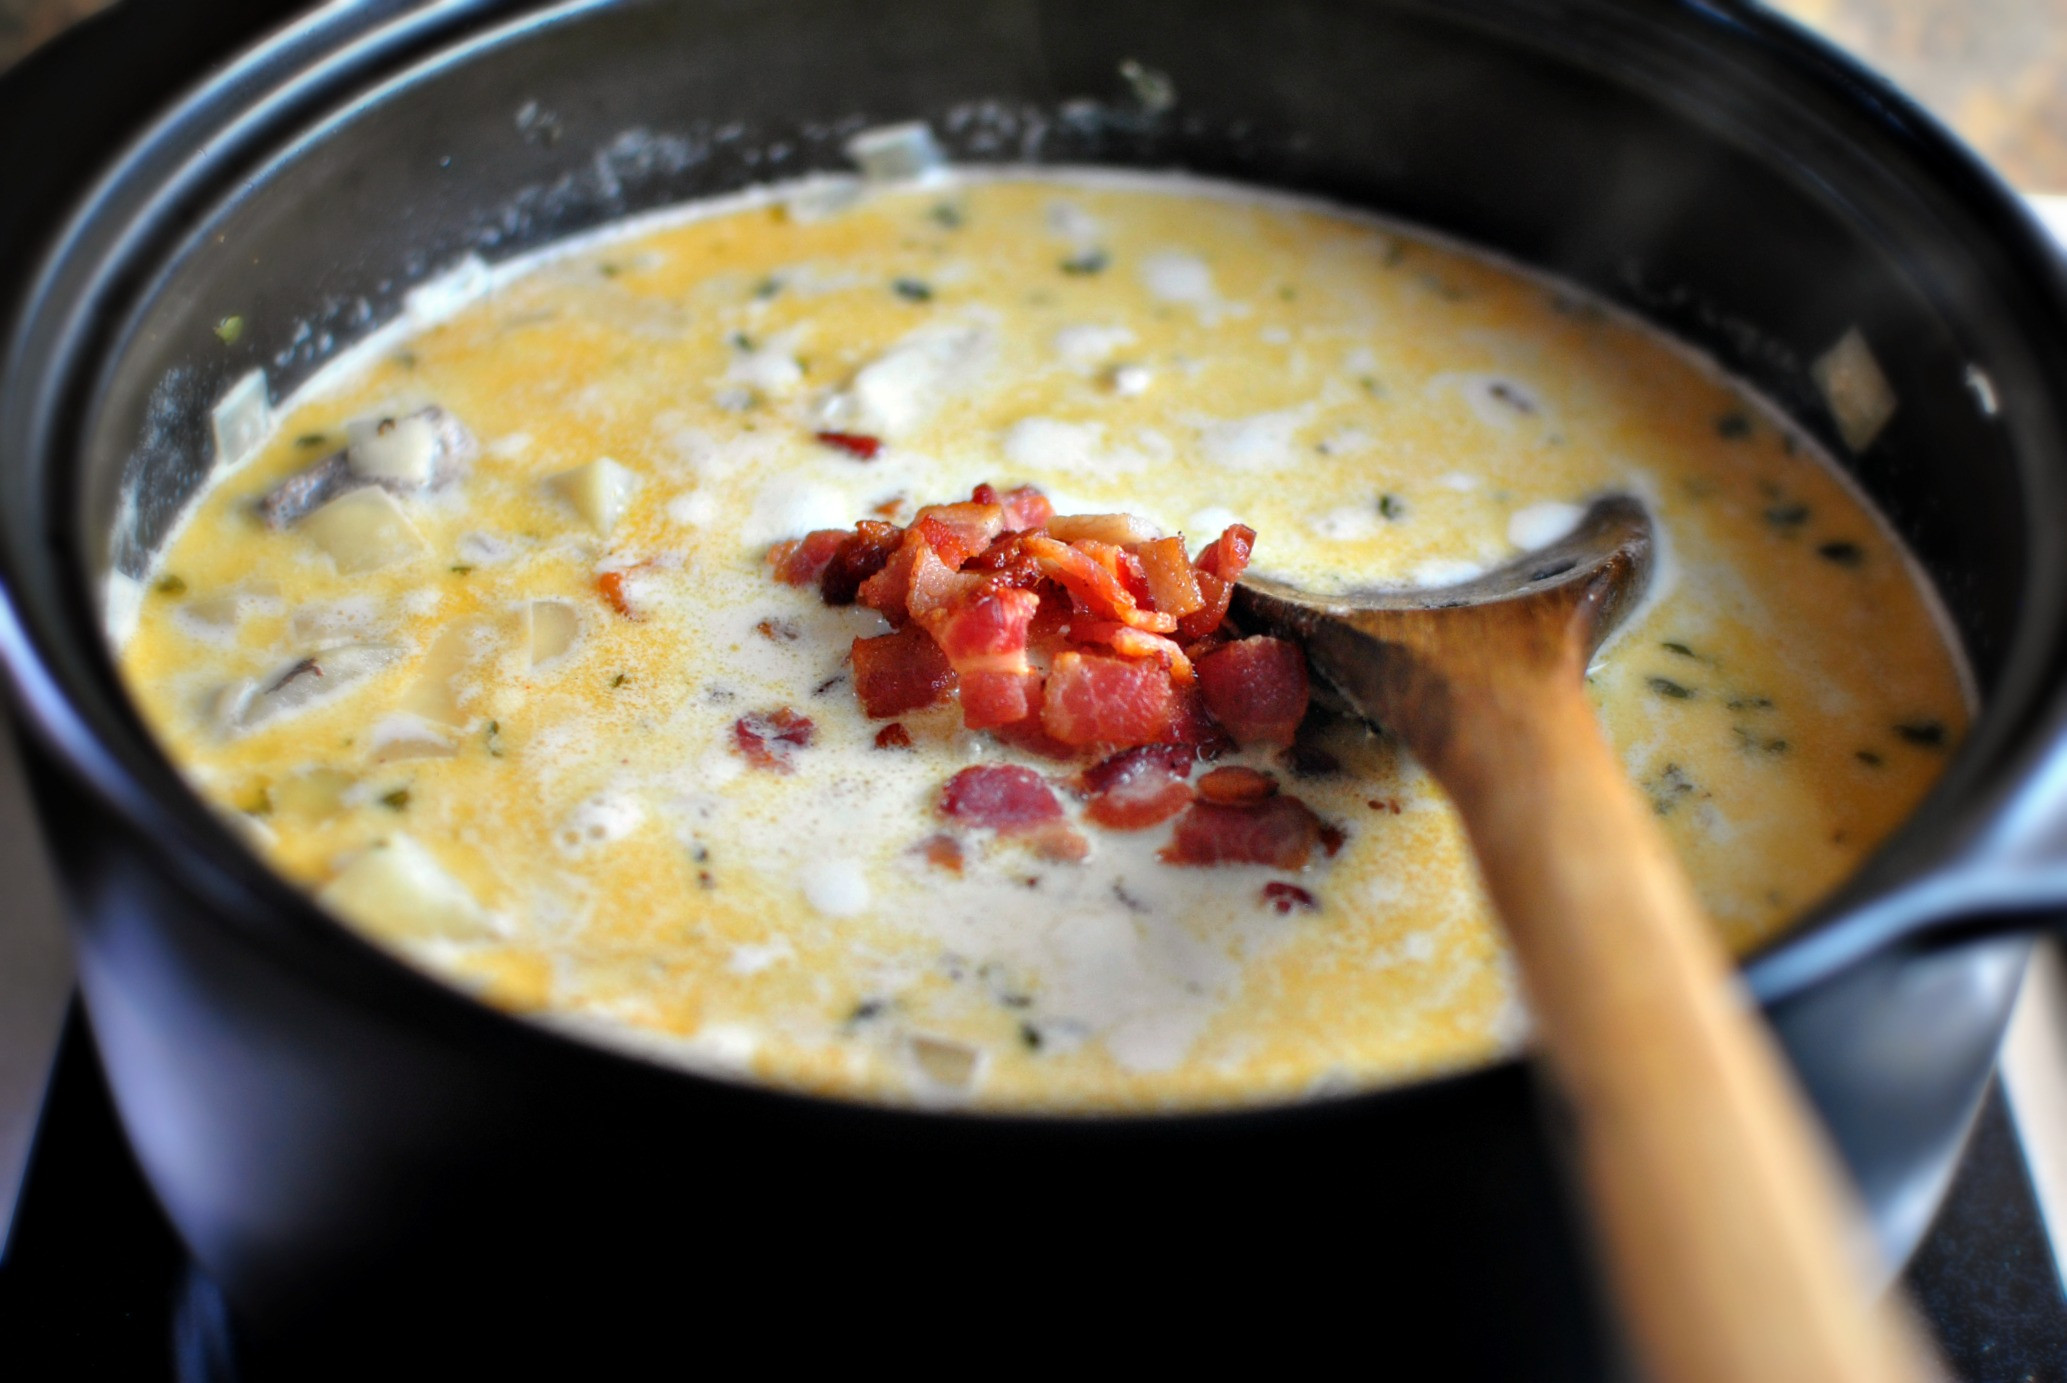 Our 15 Fish Chowder Recipe with Bacon
 Ever